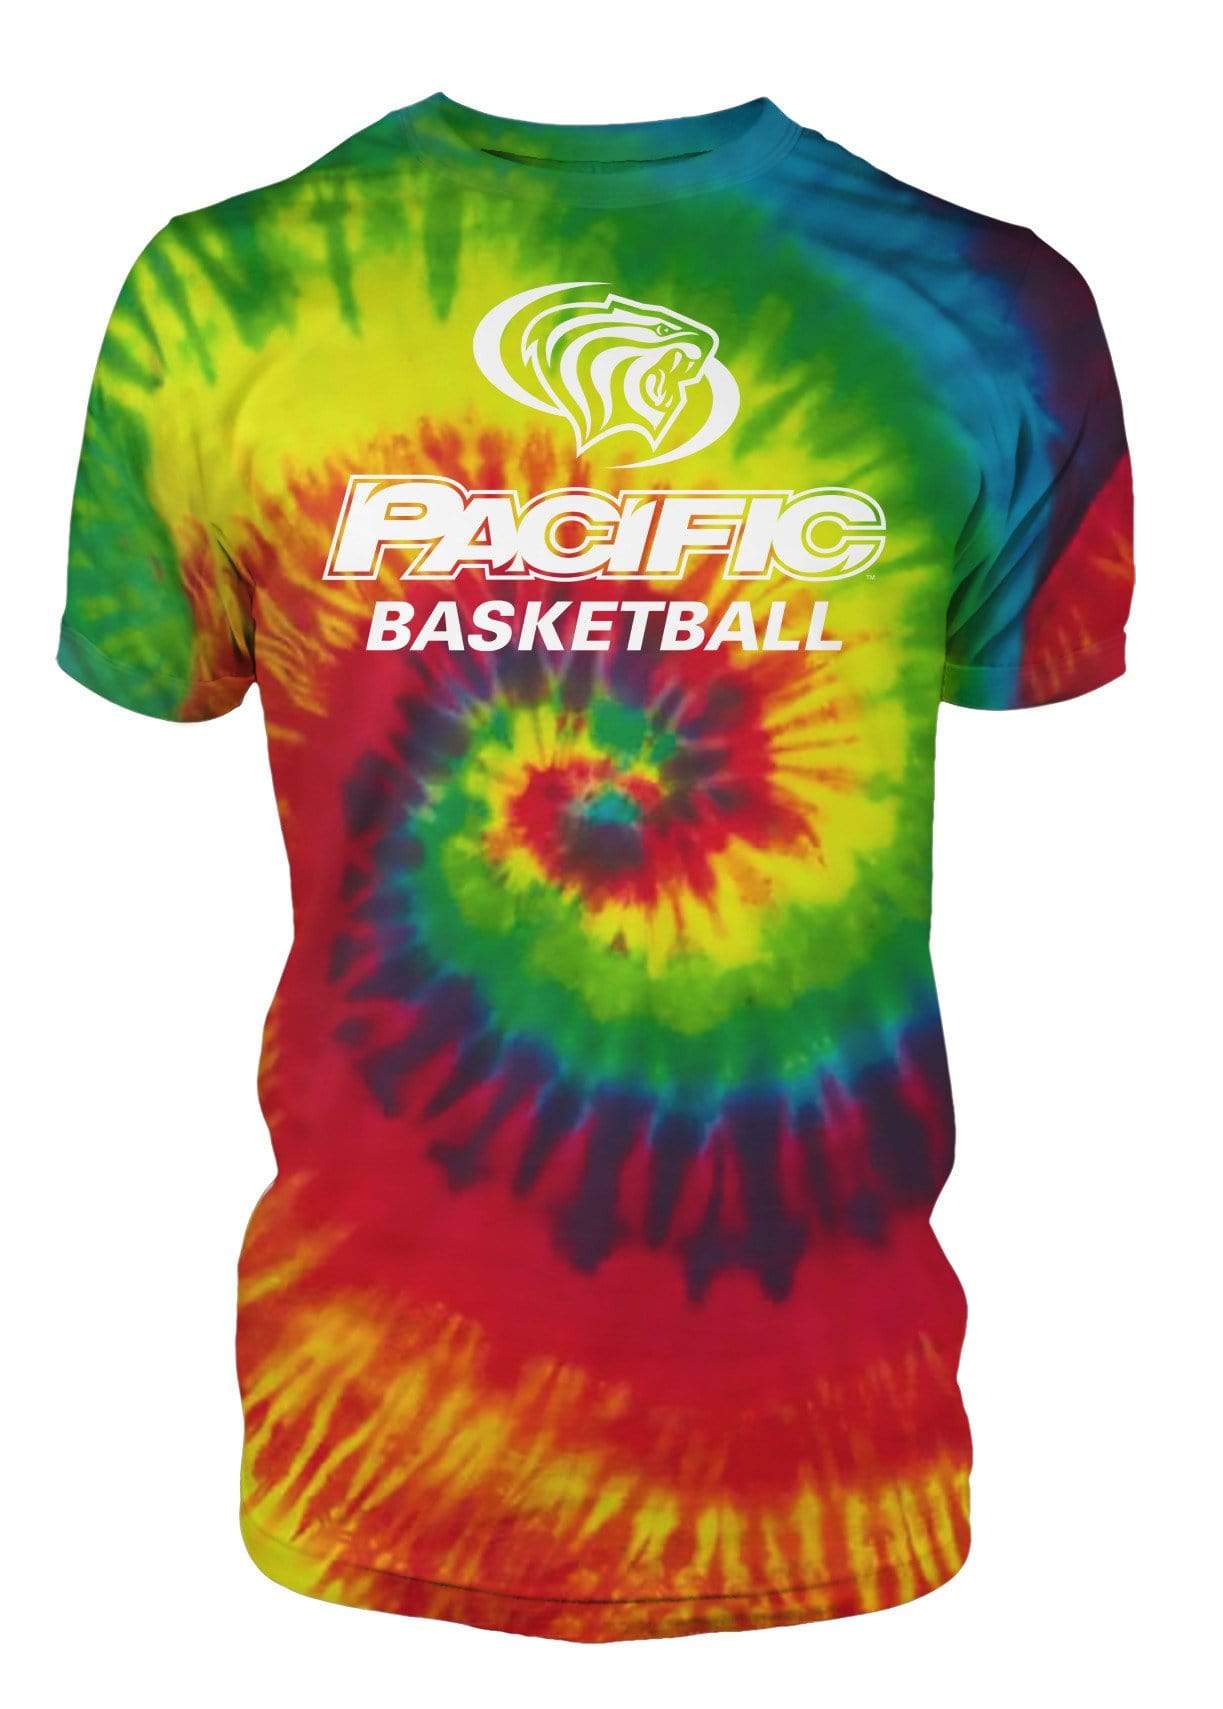 University of the Pacific Tigers Basketball Division I T-shirt by Zeus Collegiate